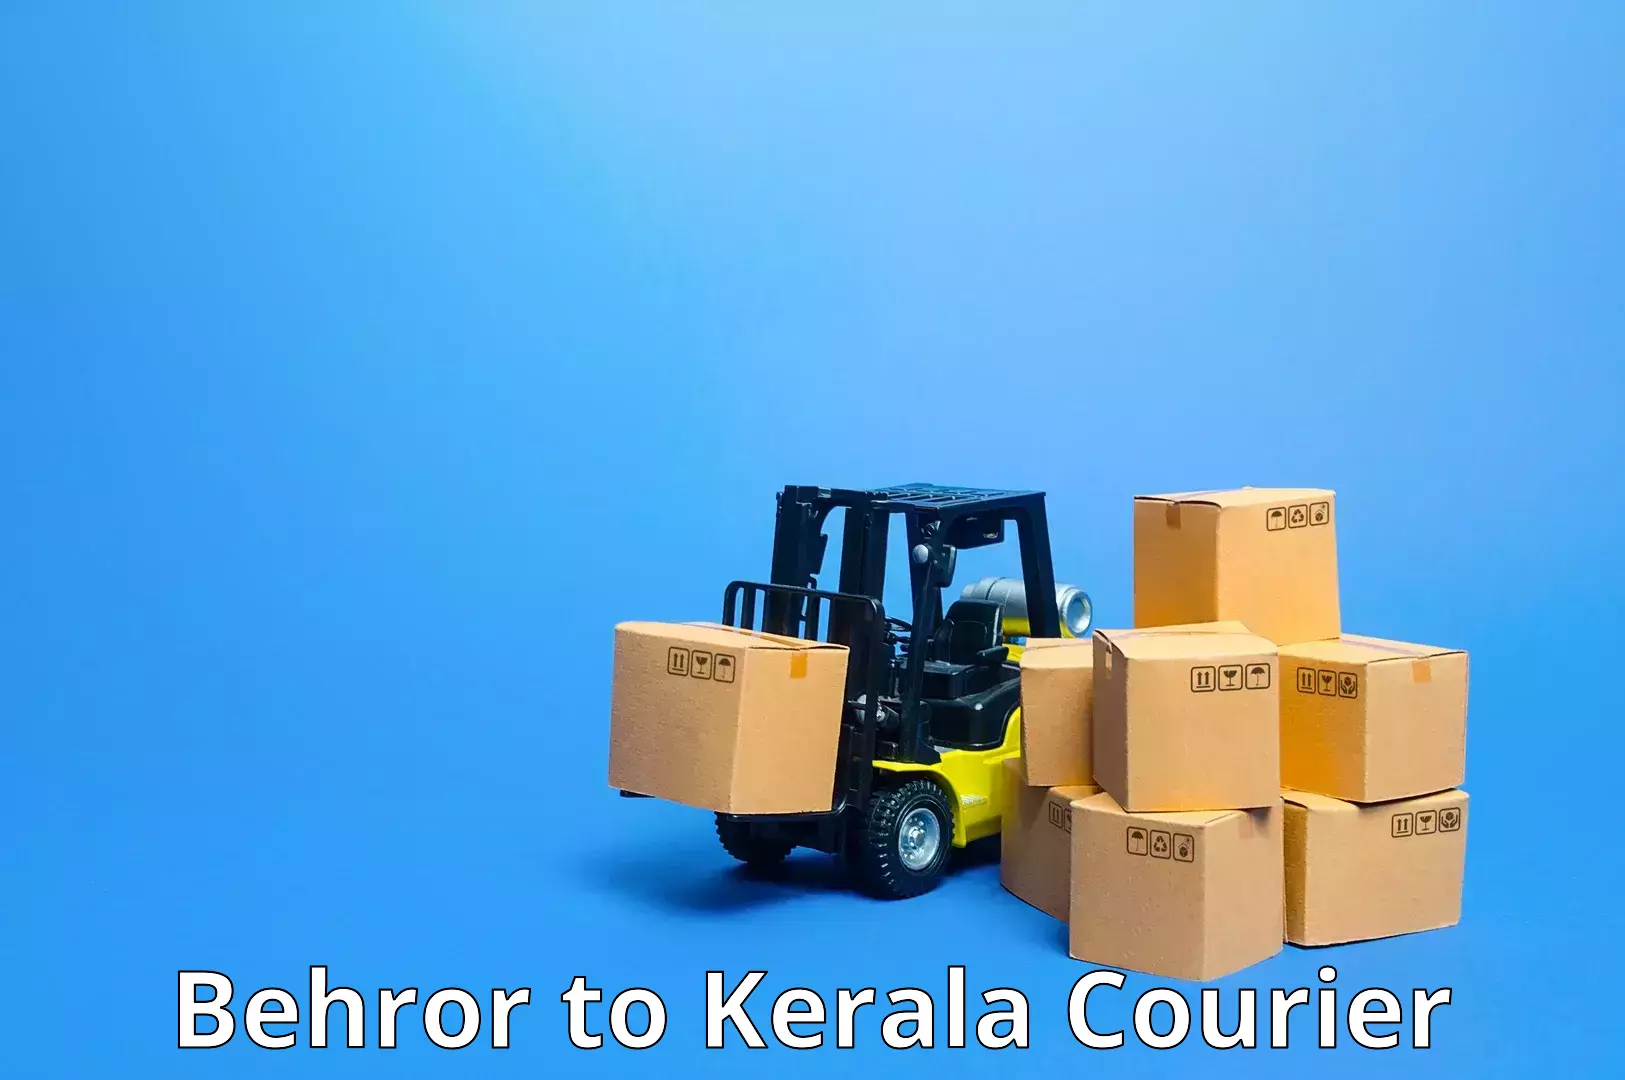 Efficient shipping operations Behror to Kerala